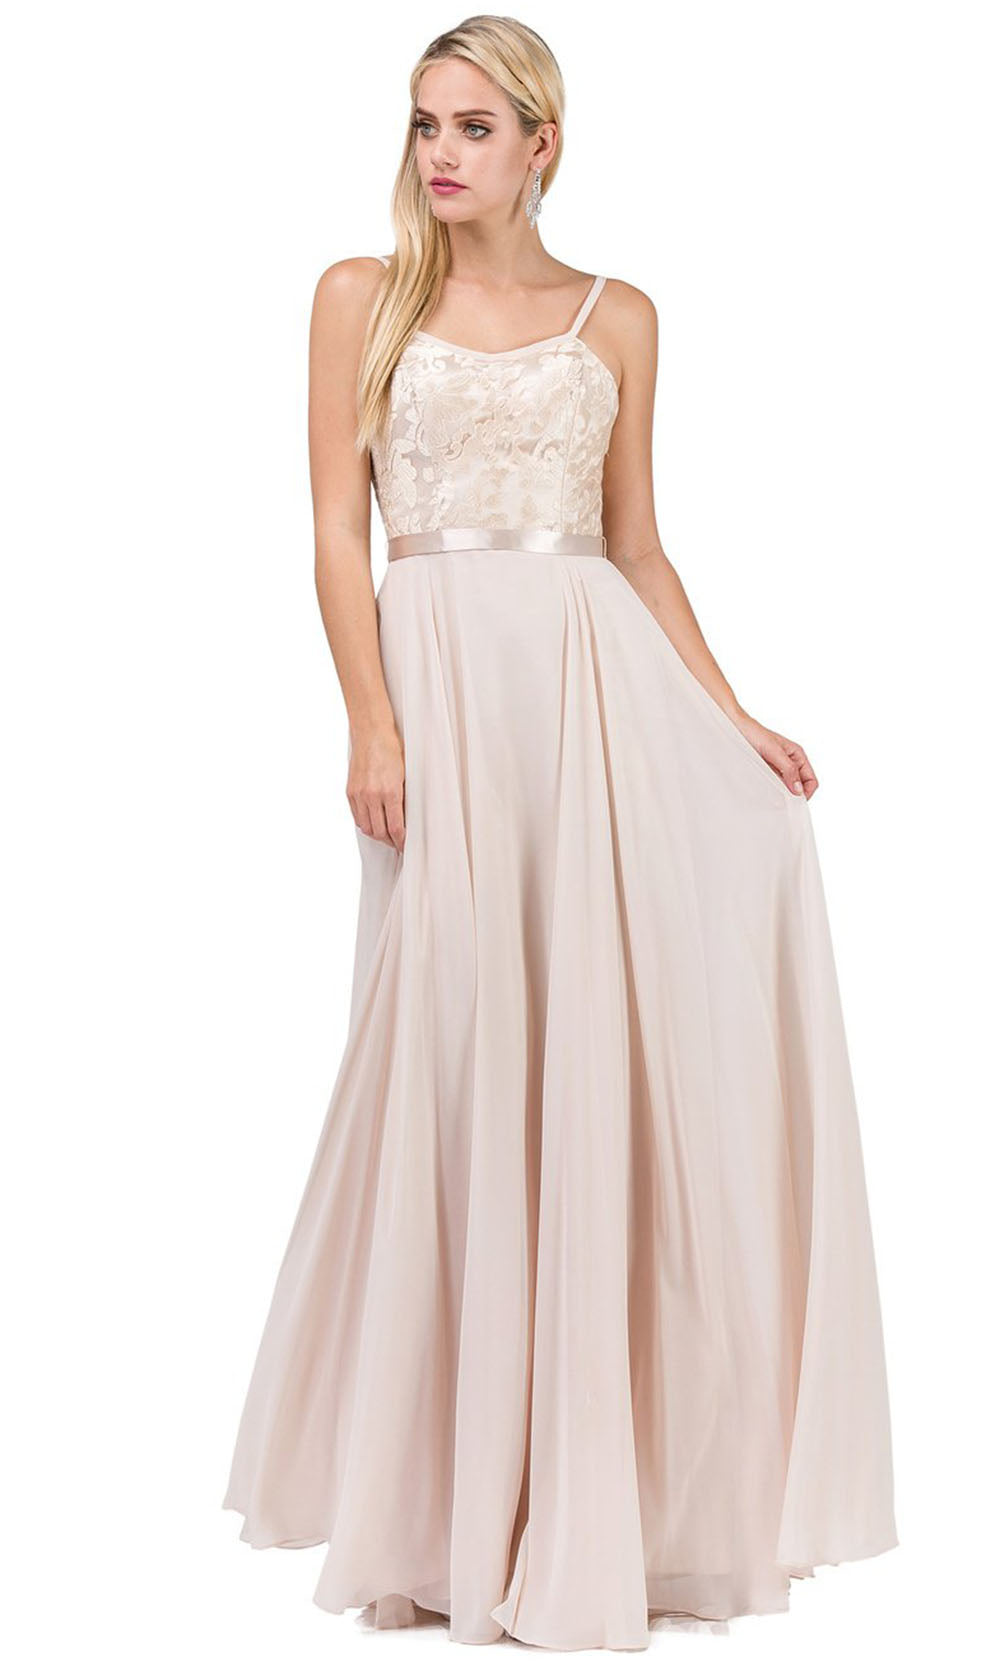 Dancing Queen - 9914 Embroidered Scoop Neck Long A-Line Dress In Neutral